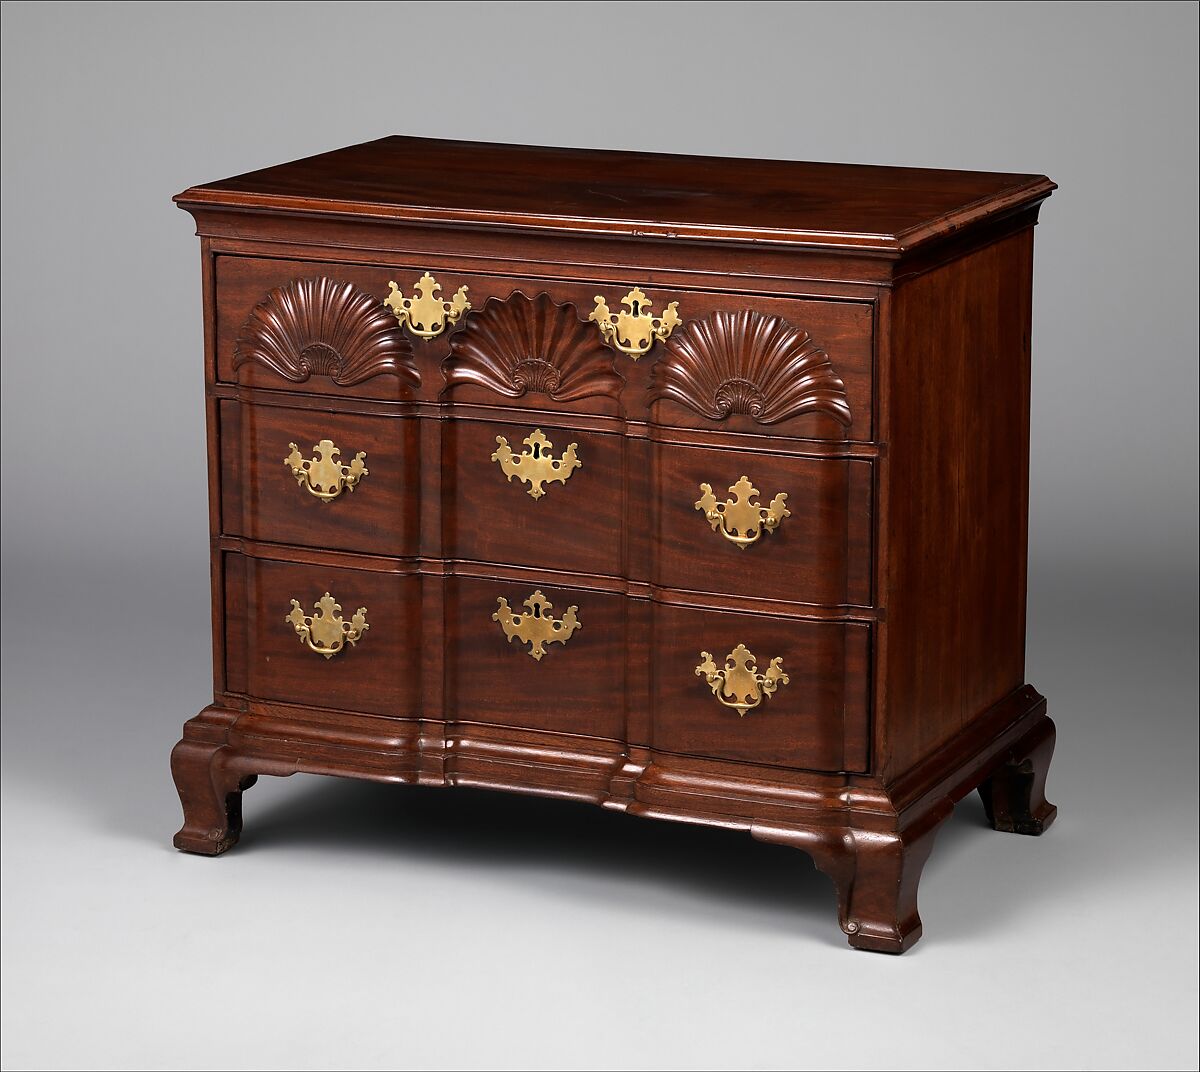 Chest of drawers, Mahogany, American 